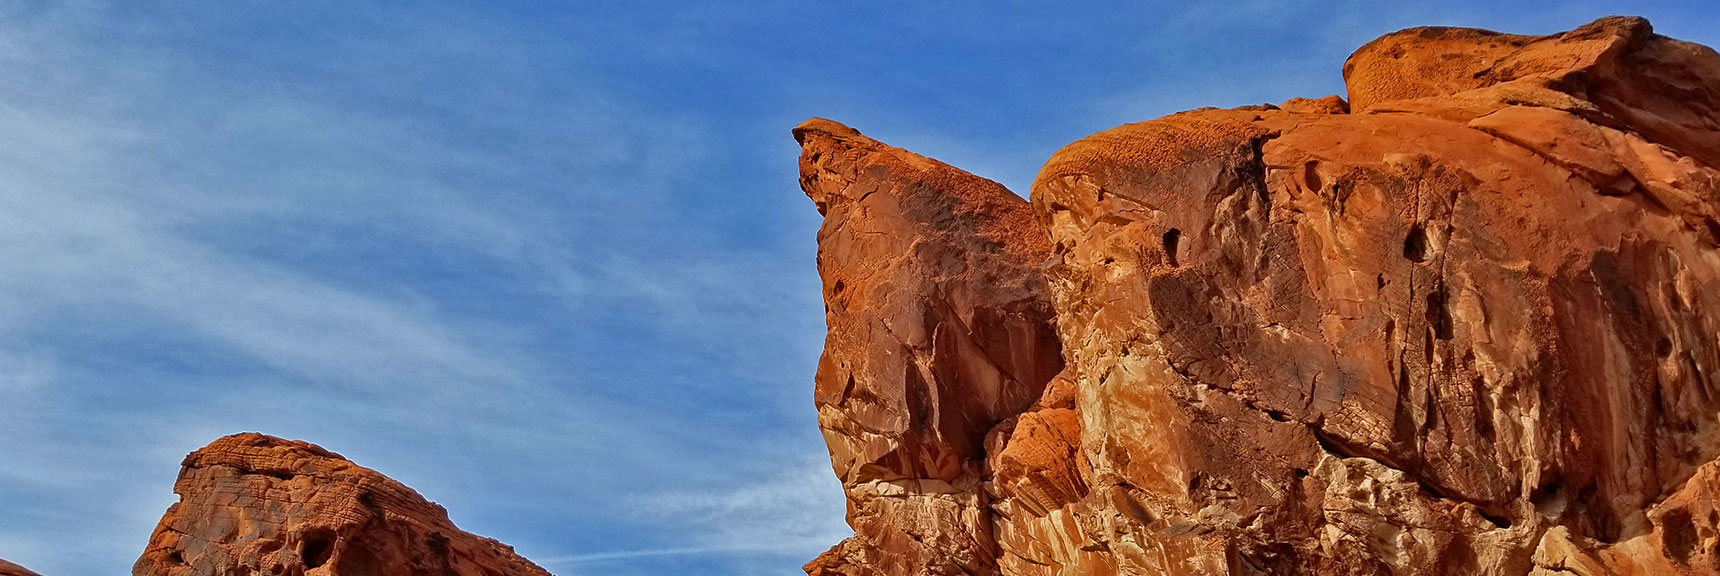 Red and White Rock Against Blue Sky in Fire Canyon in Valley of Fire State Park, Nevada